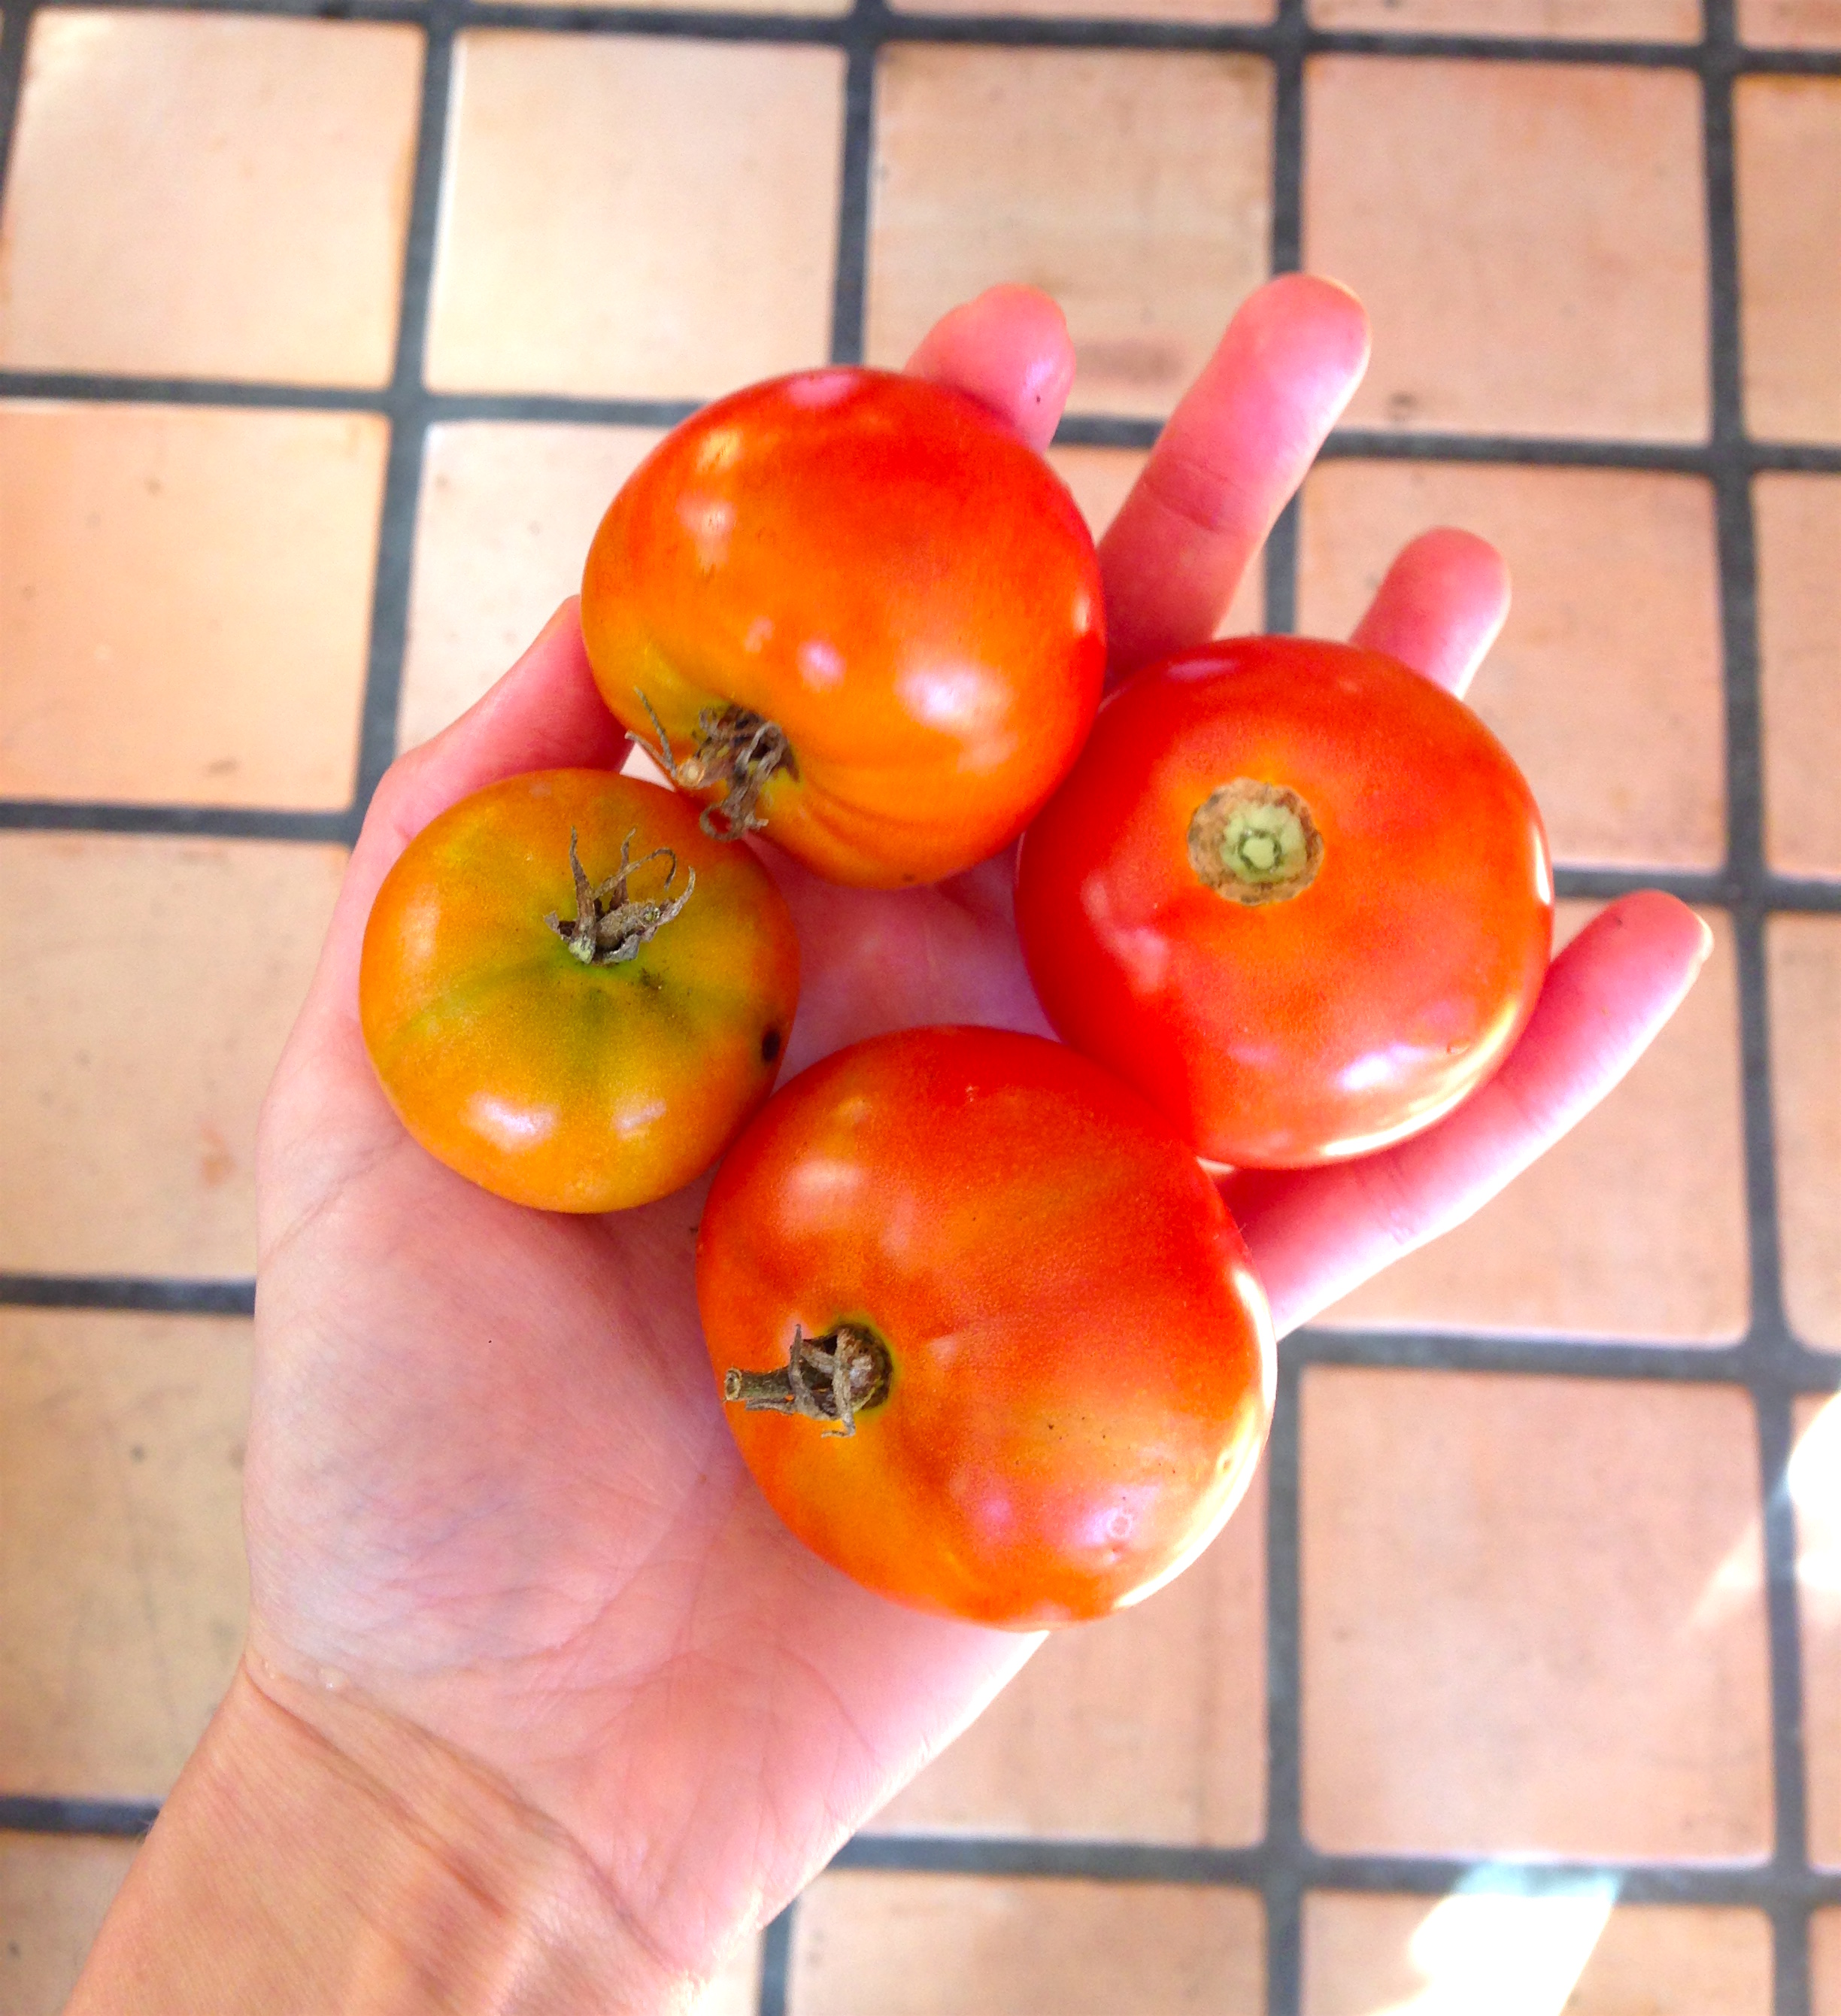 4 of our 8 tomatoes...